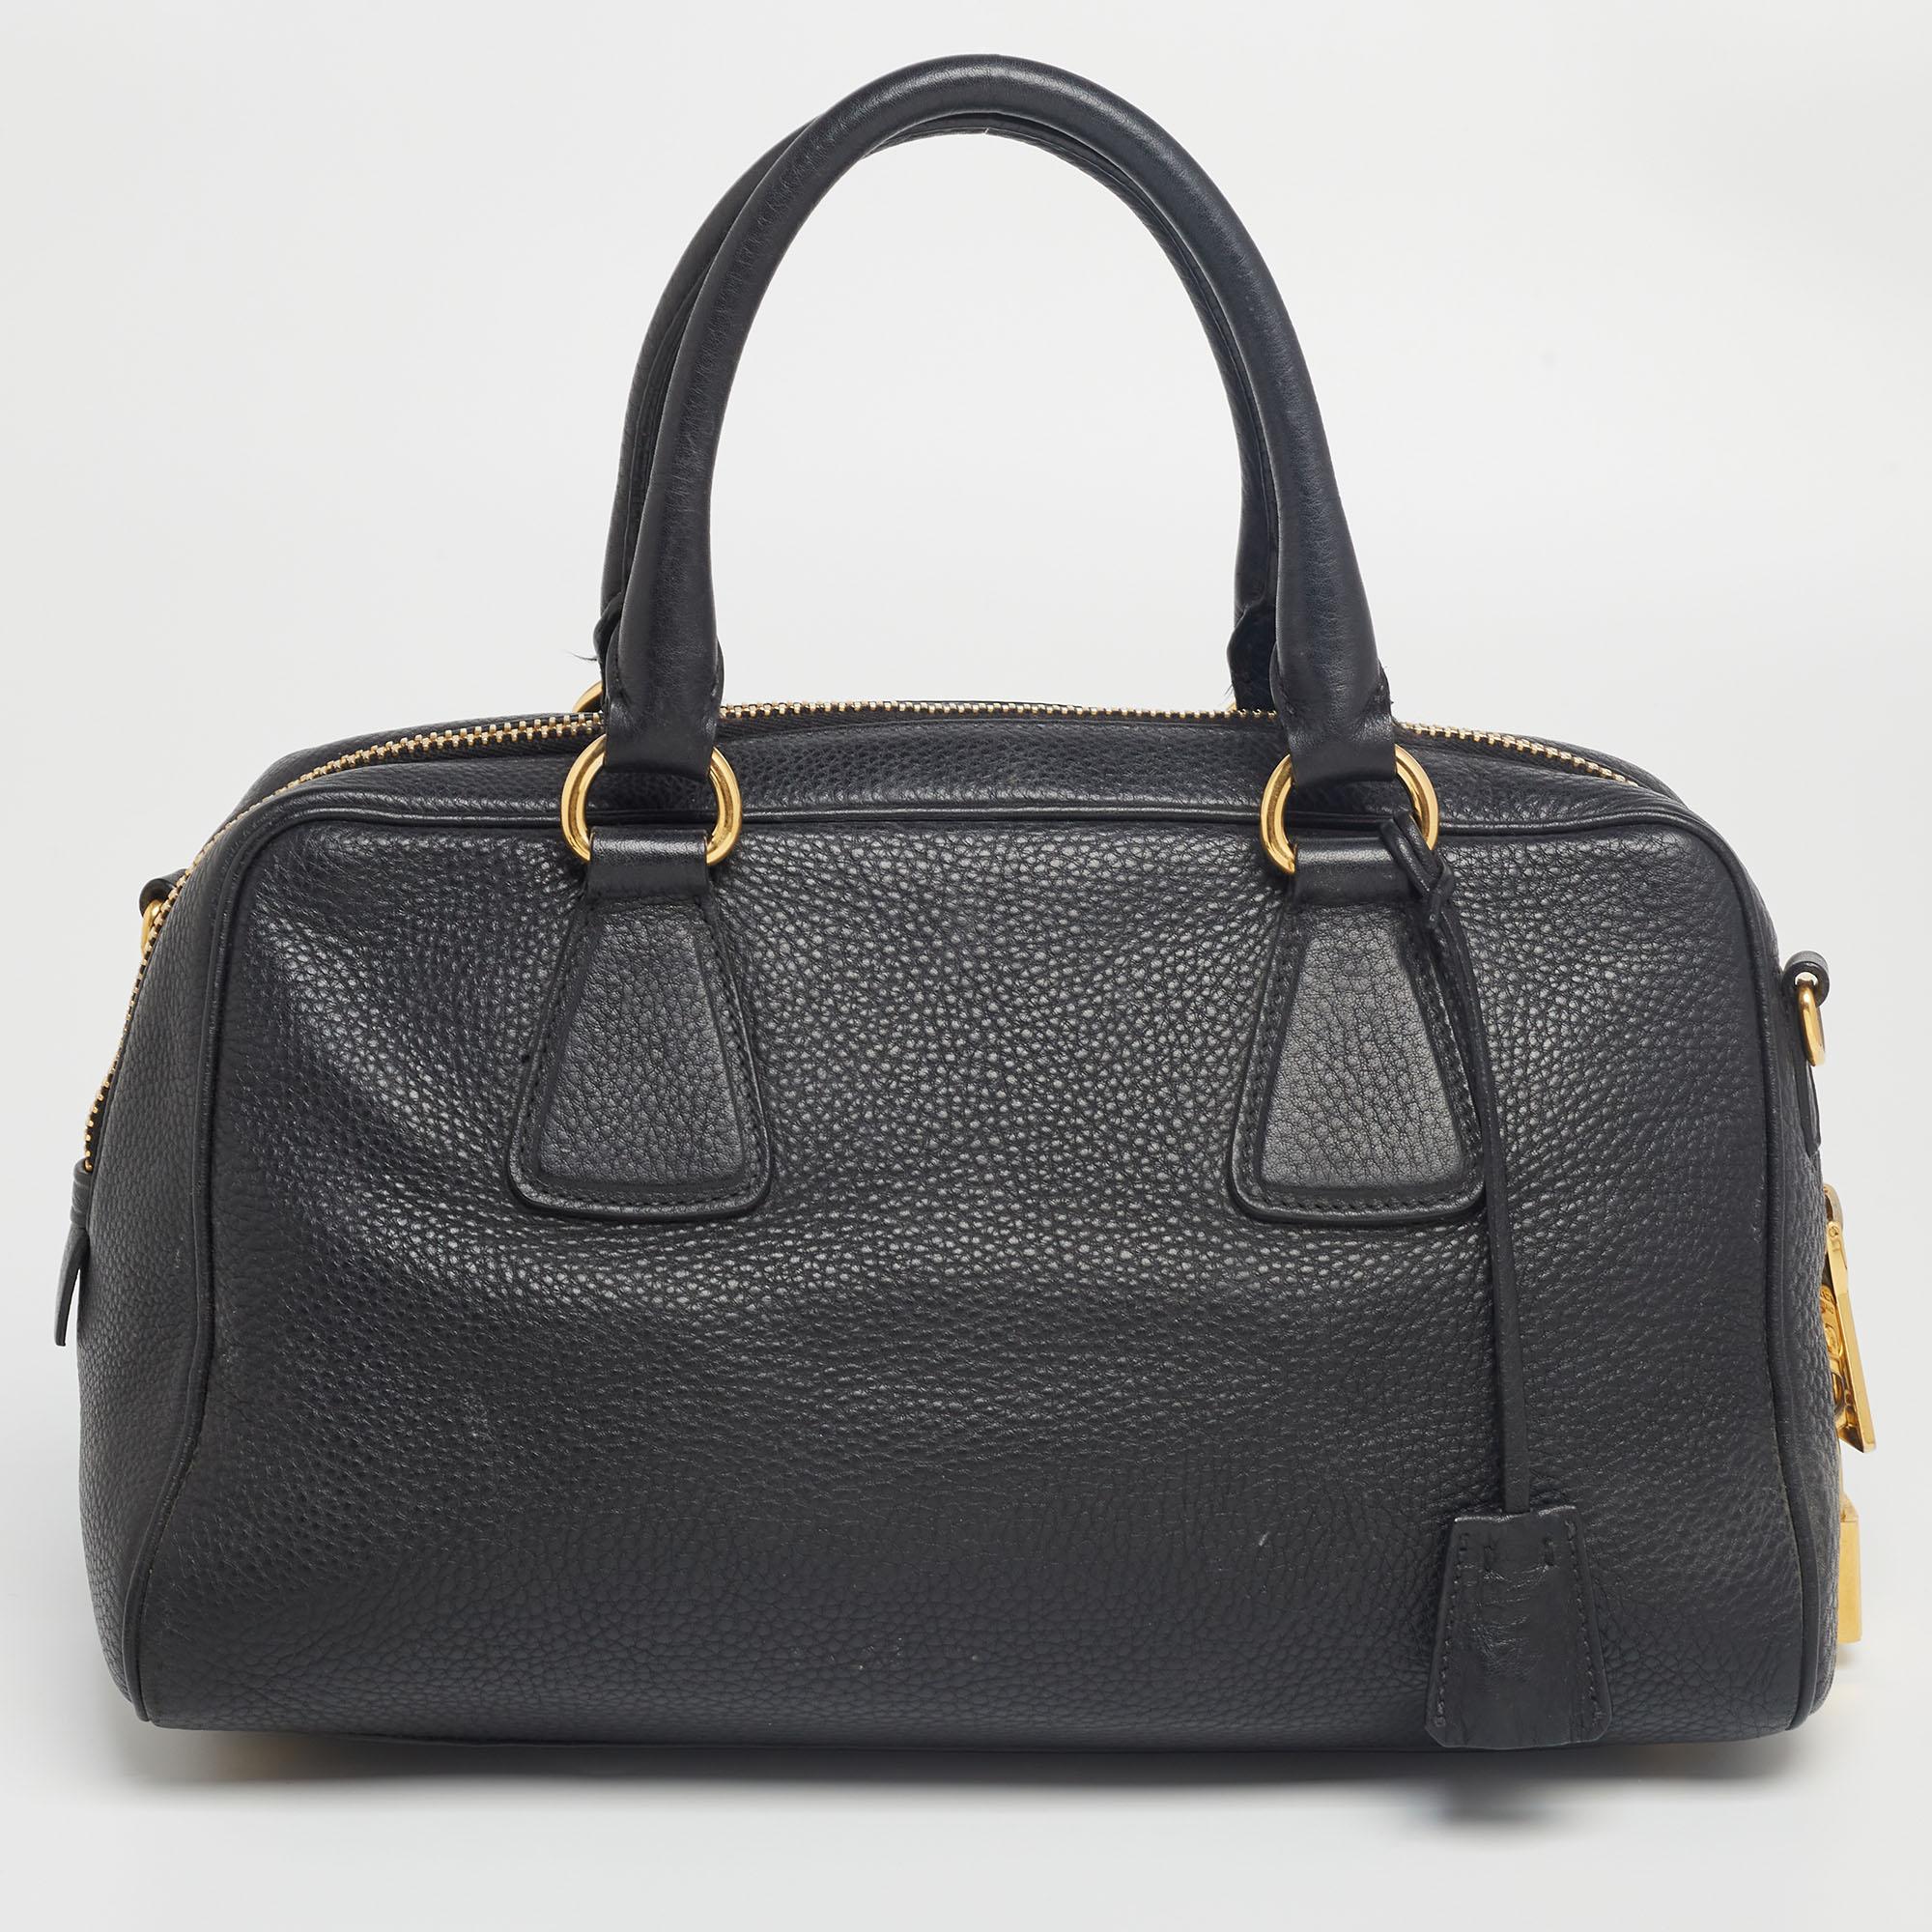 This satchel from the House of Prada is great for everyday use. It is made from black Vitello Daino leather, which is embellished with gold-tone hardware. It showcases dual handles and is provided with a nylon-lined interior. This Prada satchel will